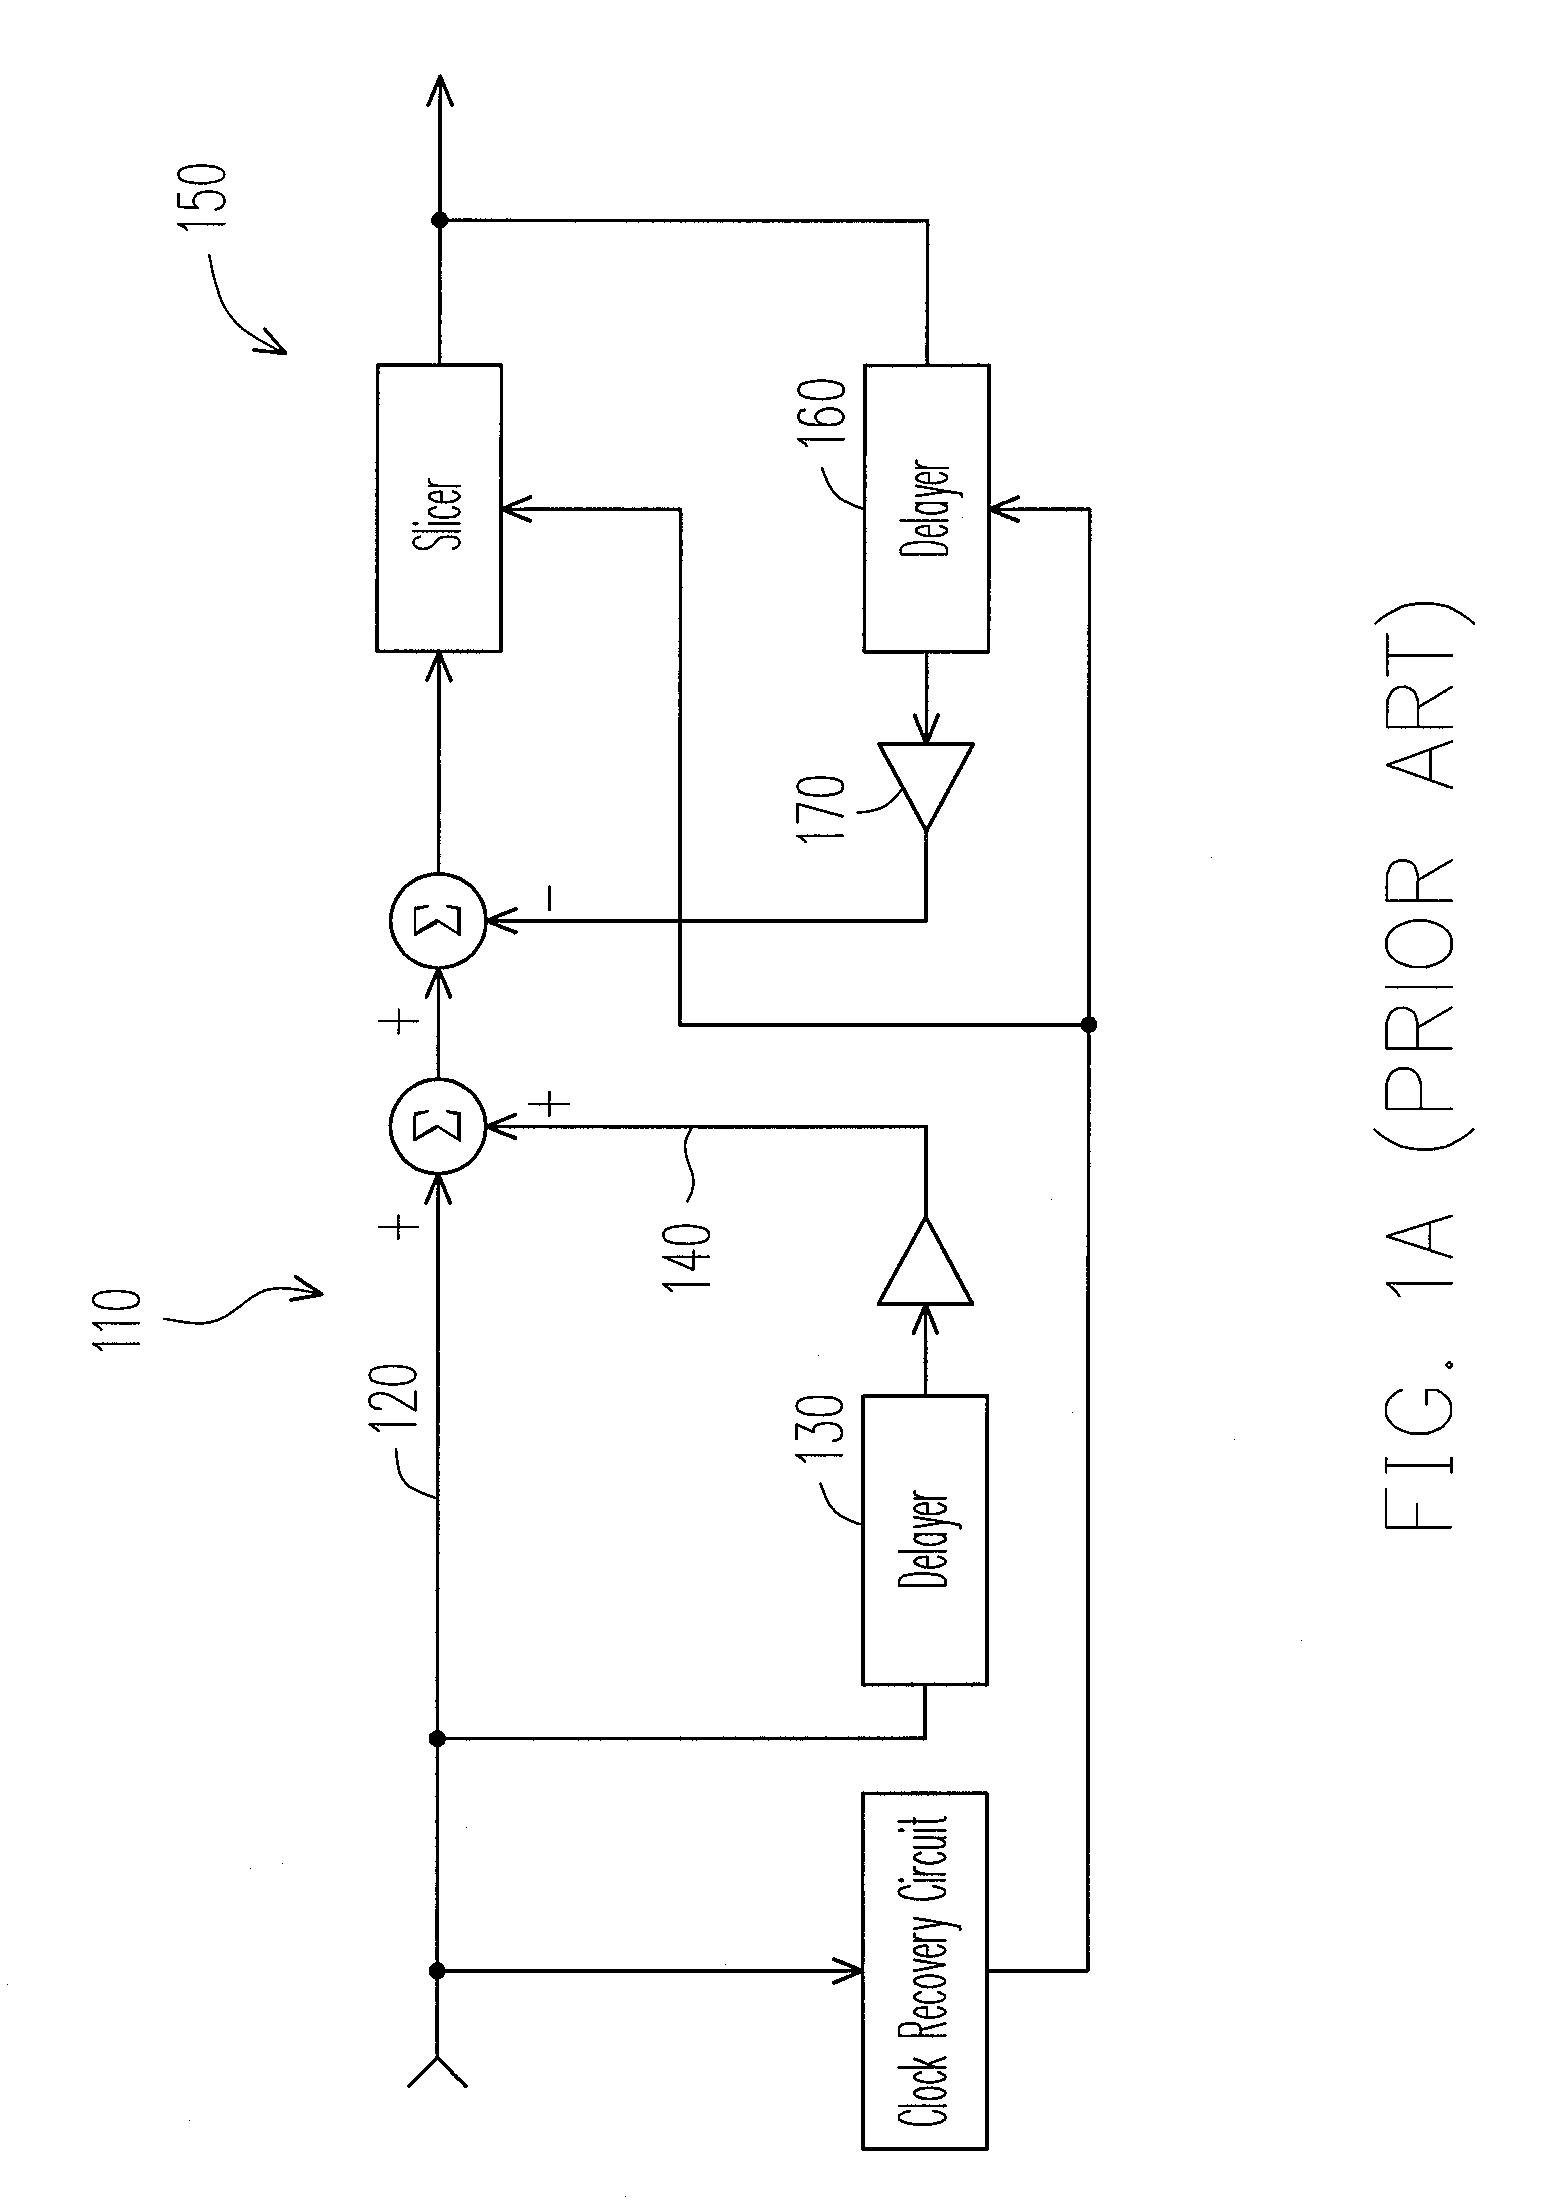 Signal processing circuit and signal processing method for removing co-channel interference